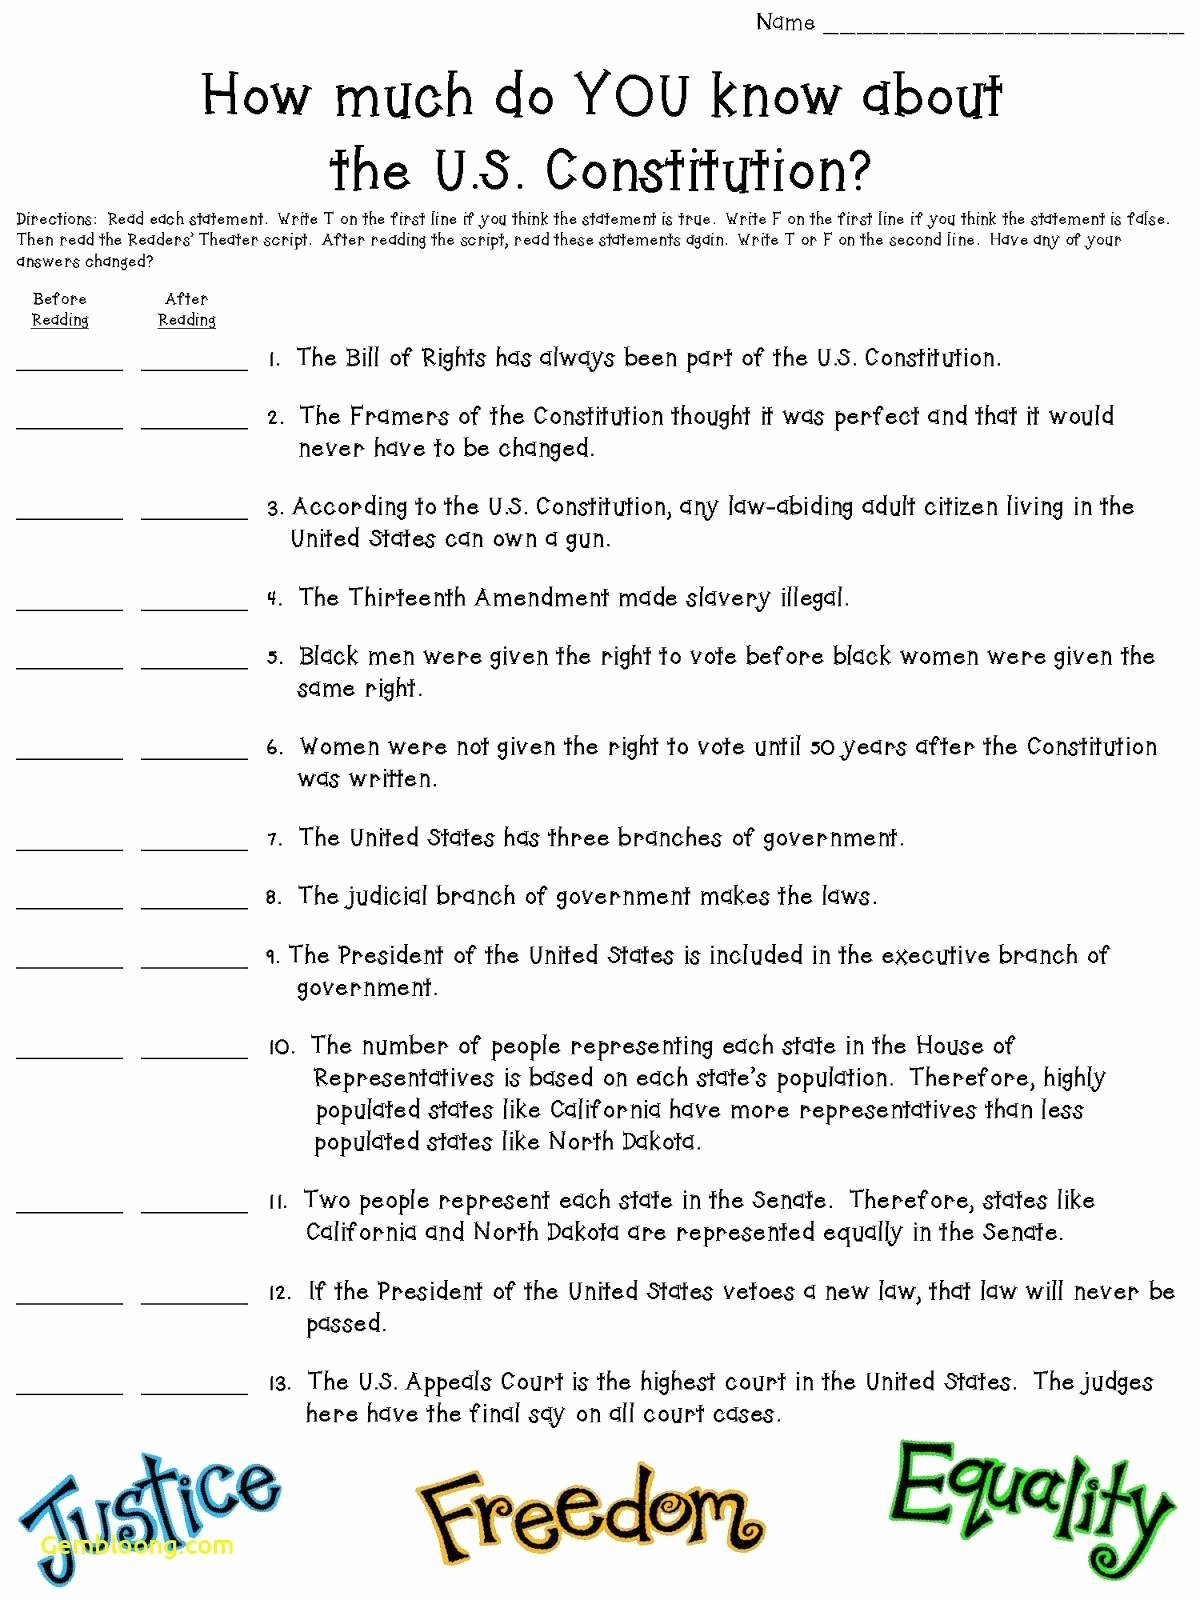 Constitutional Principles Worksheet Answers Lovely the Principles Constitution Worksheet